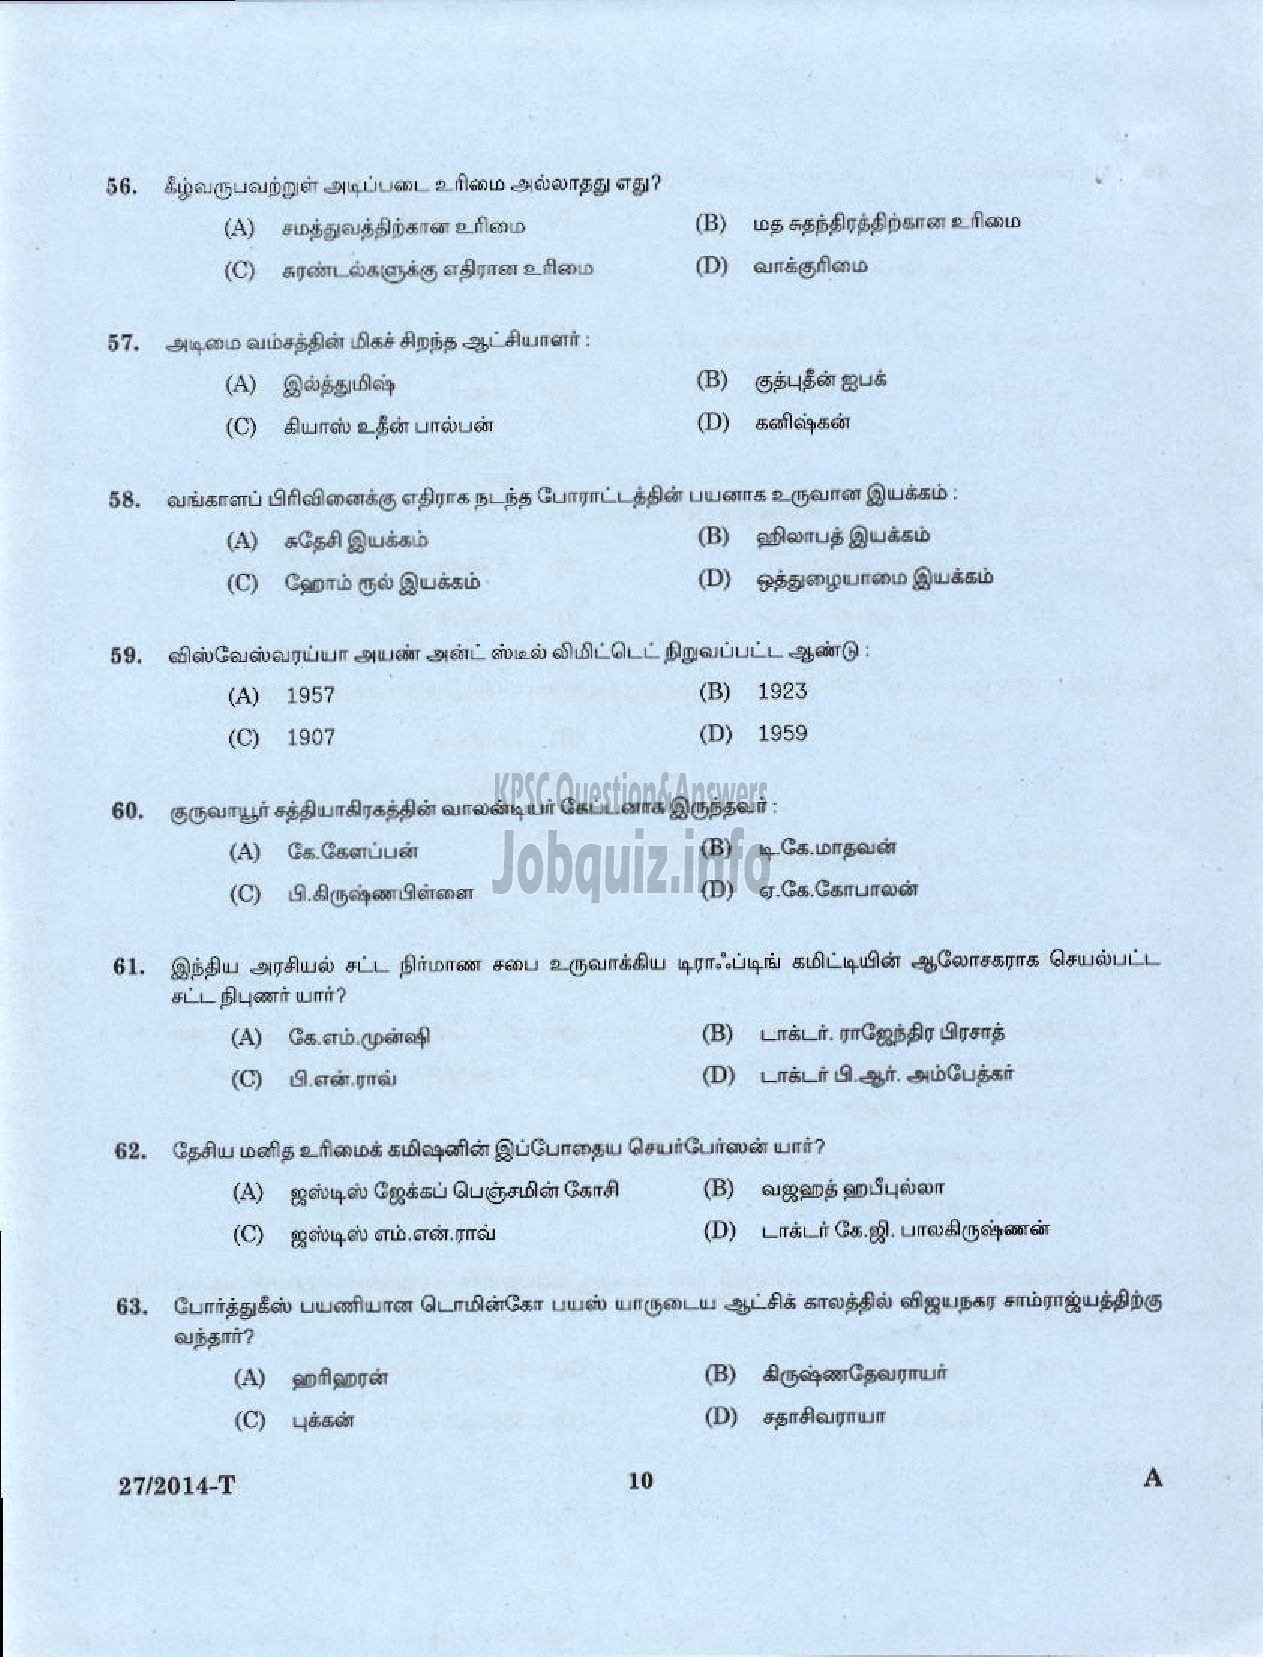 Kerala PSC Question Paper - LOWER DIVISION CLERK 2014 VARIOUS BY TRANSFER ( Tamil )-8